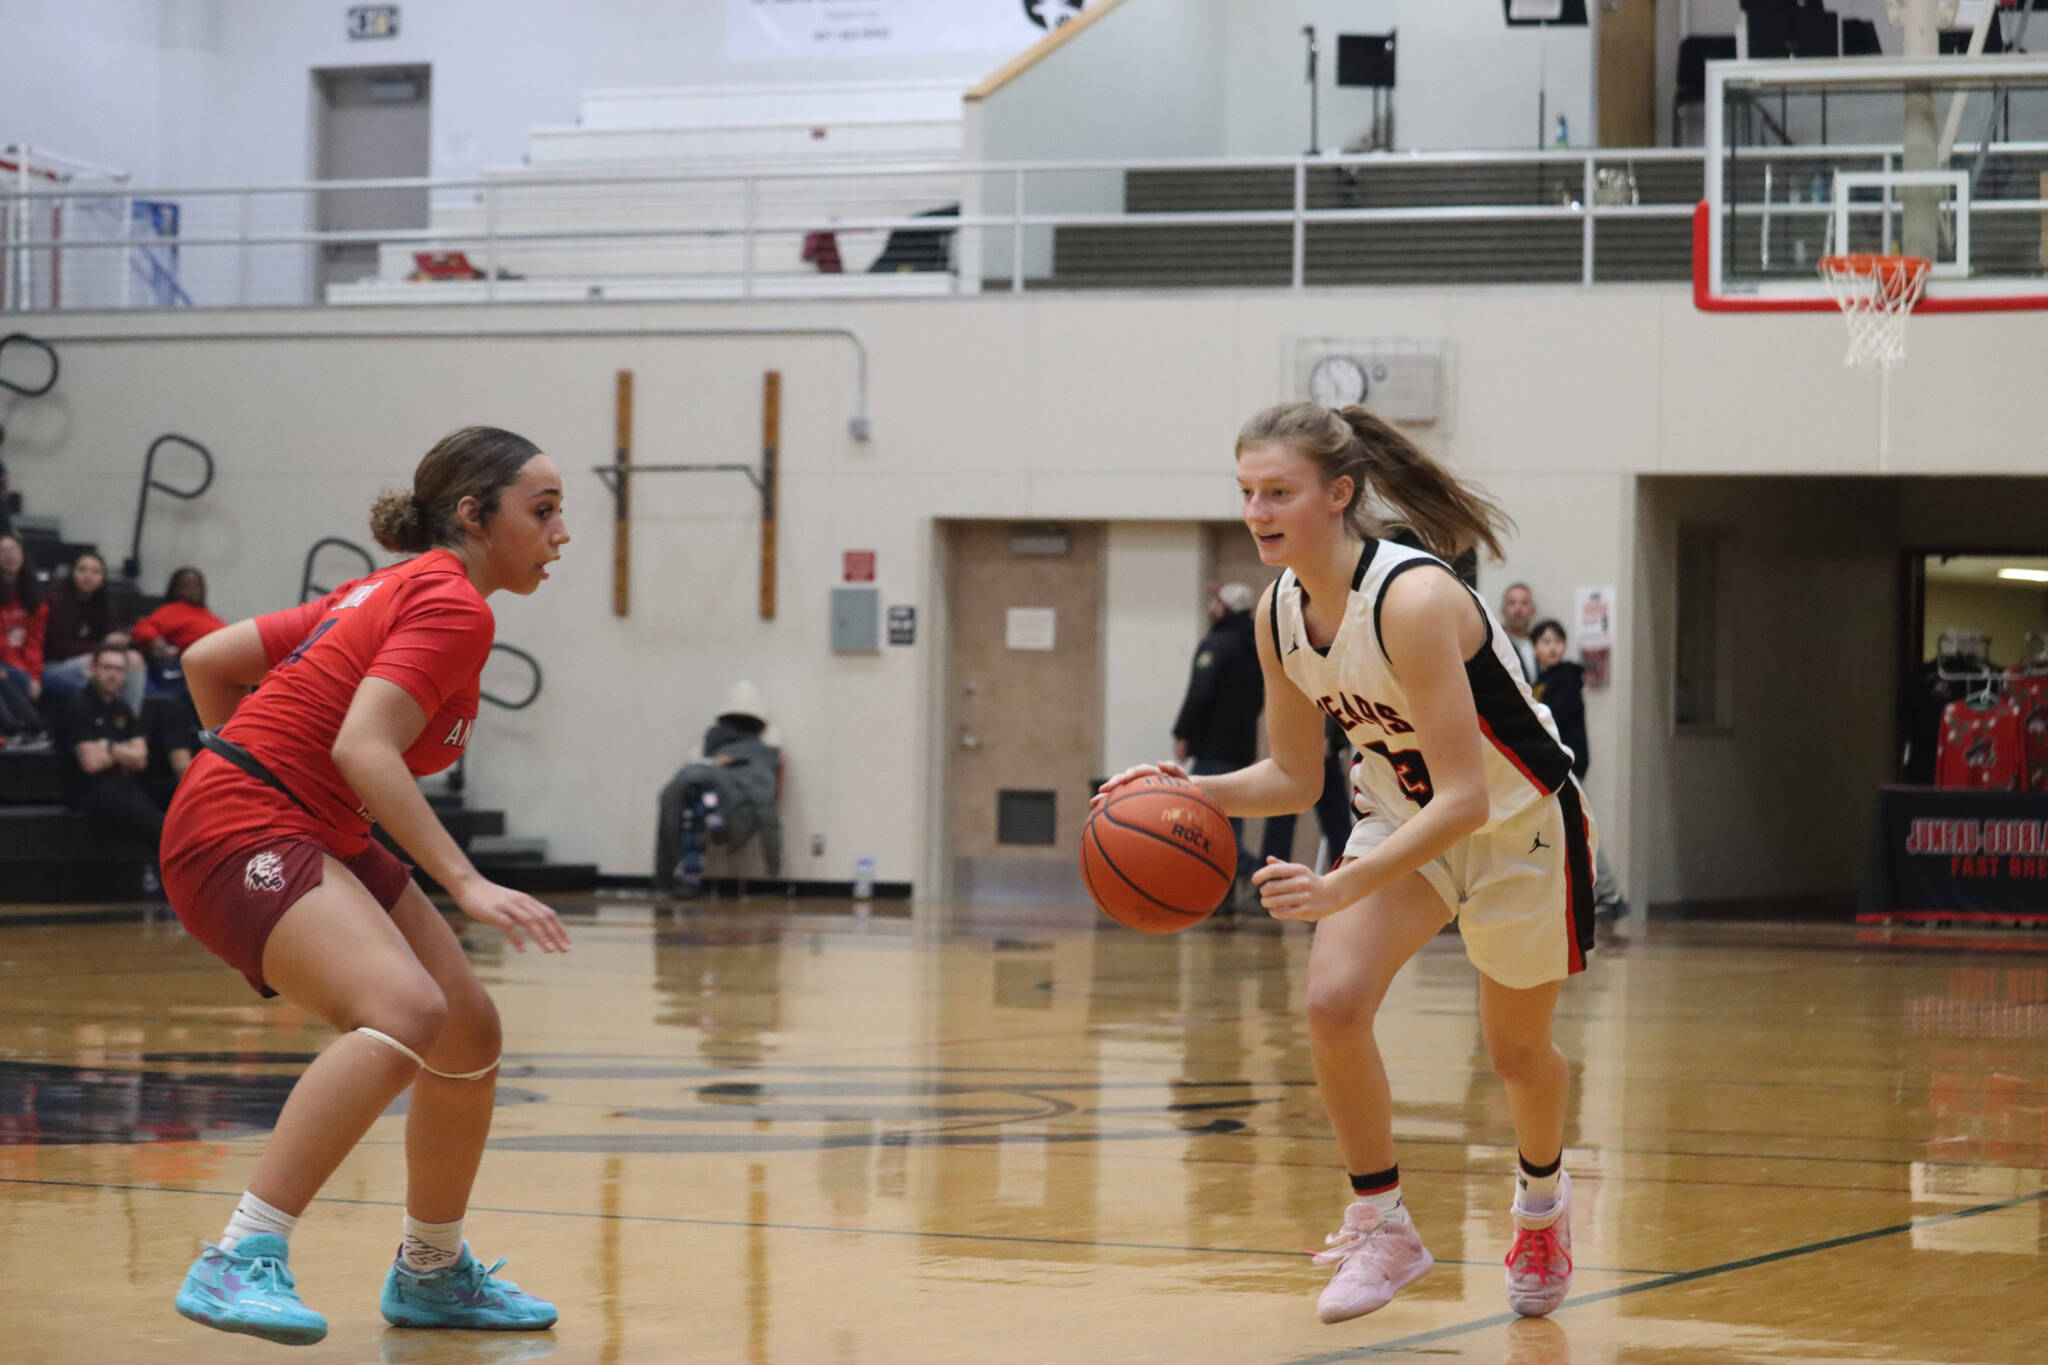 JDHS senior guard Skylar Tuckwood takes the ball down court on Friday against Anchorage Christian School. Tuckwood led the Crimson Bears in scores with 23 points in total. (Jonson Kuhn / Juneau Empire)